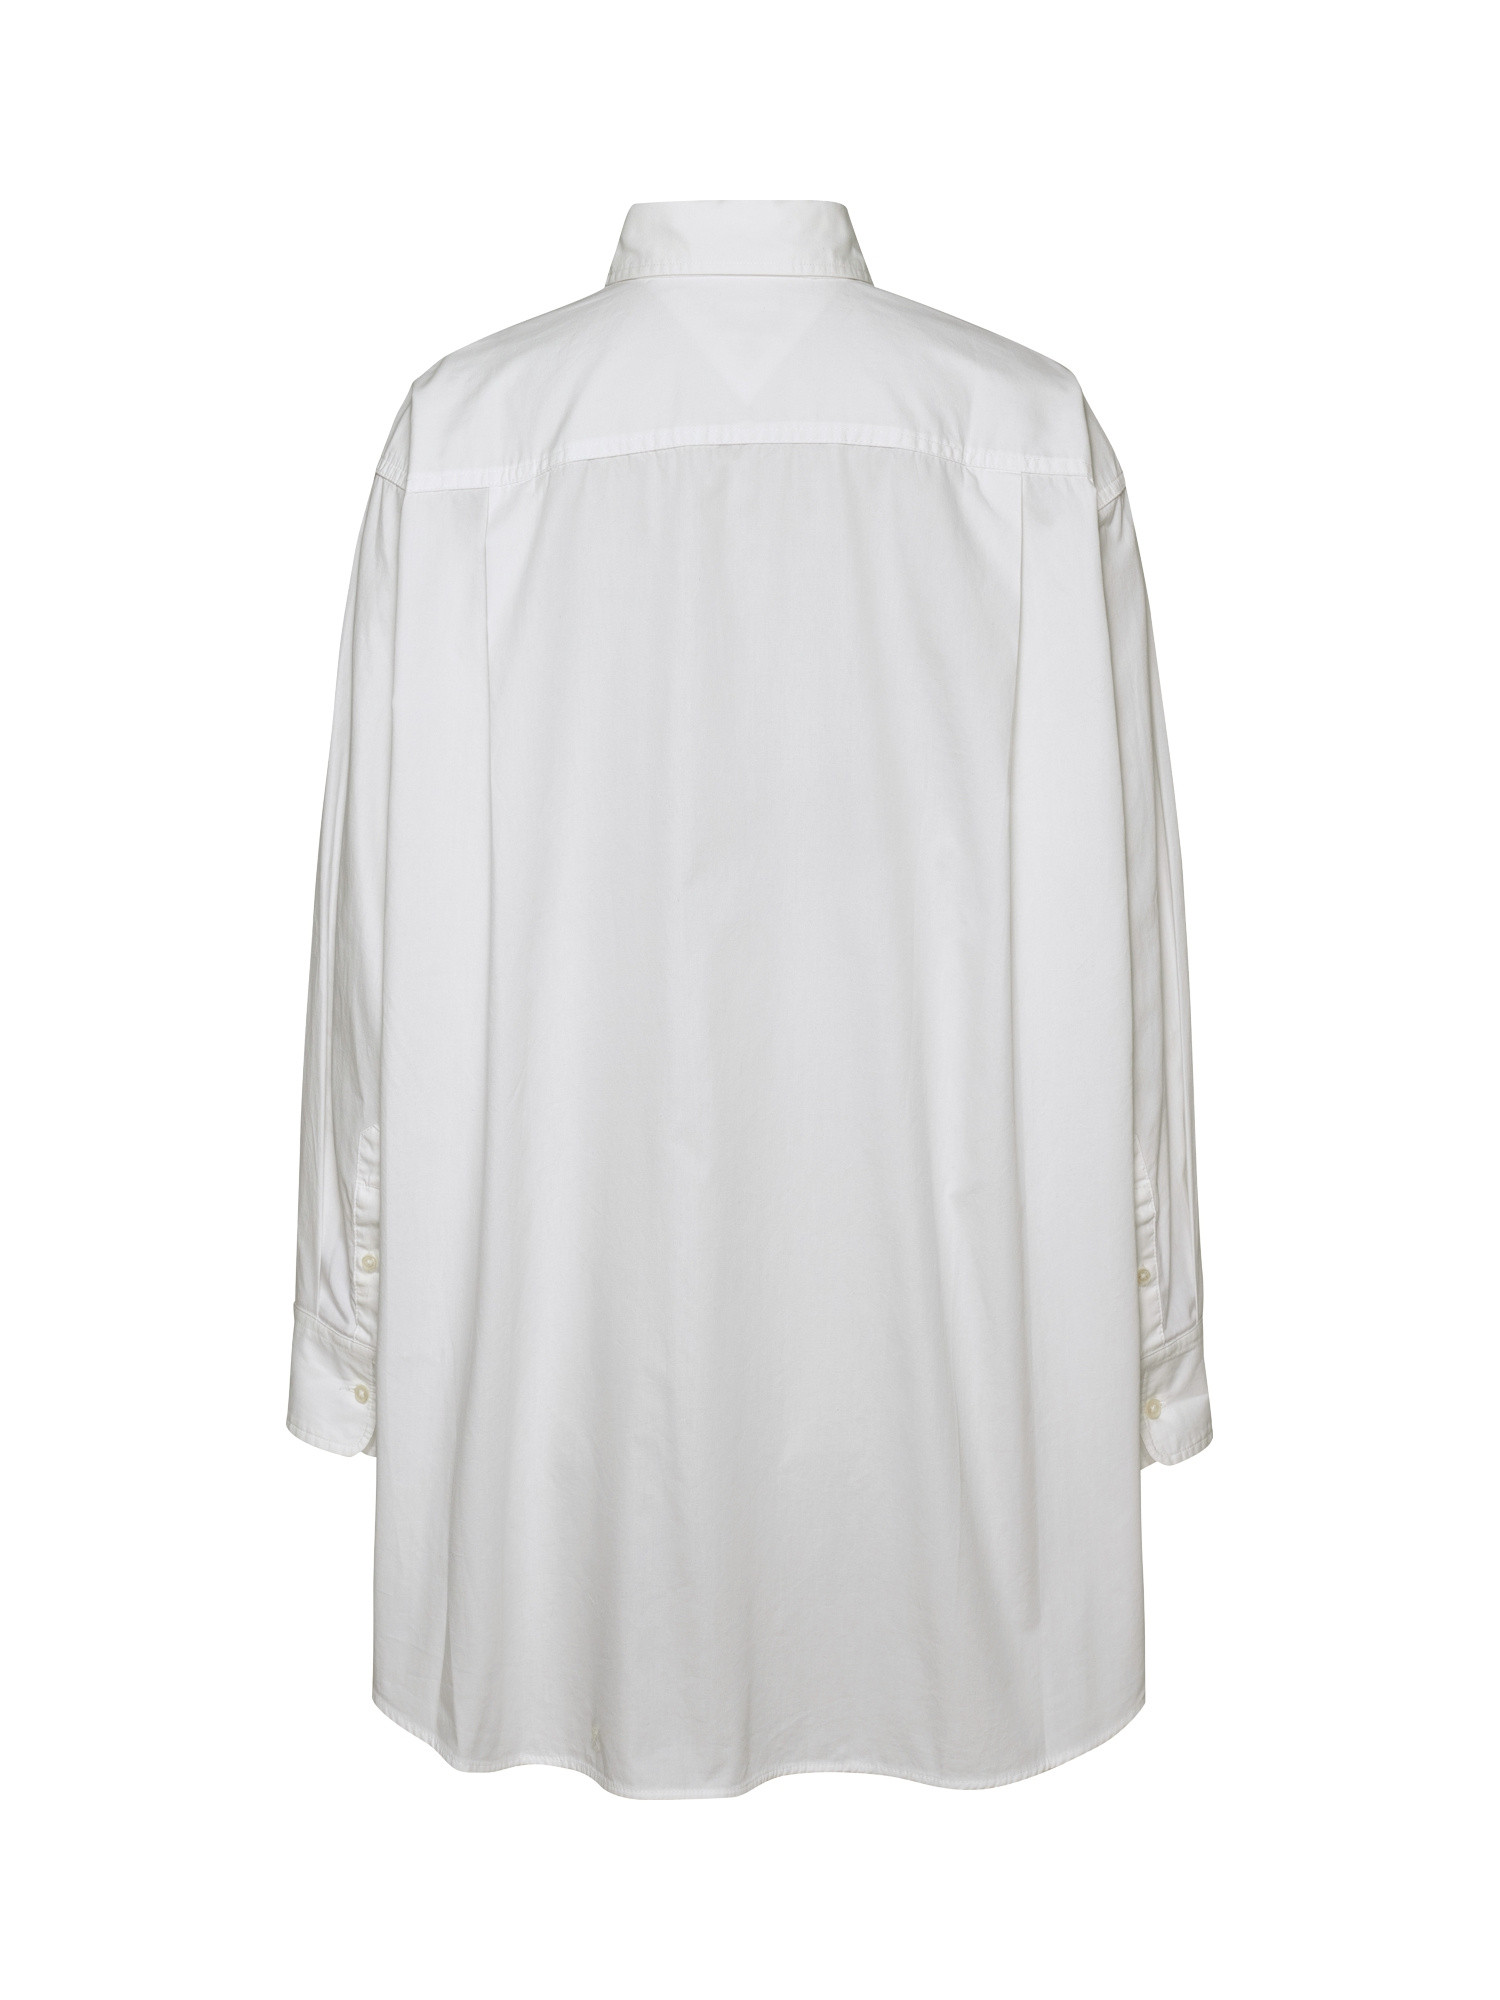 Tommy Jeans - Camicia oversize con logo in cotone, White, large image number 1